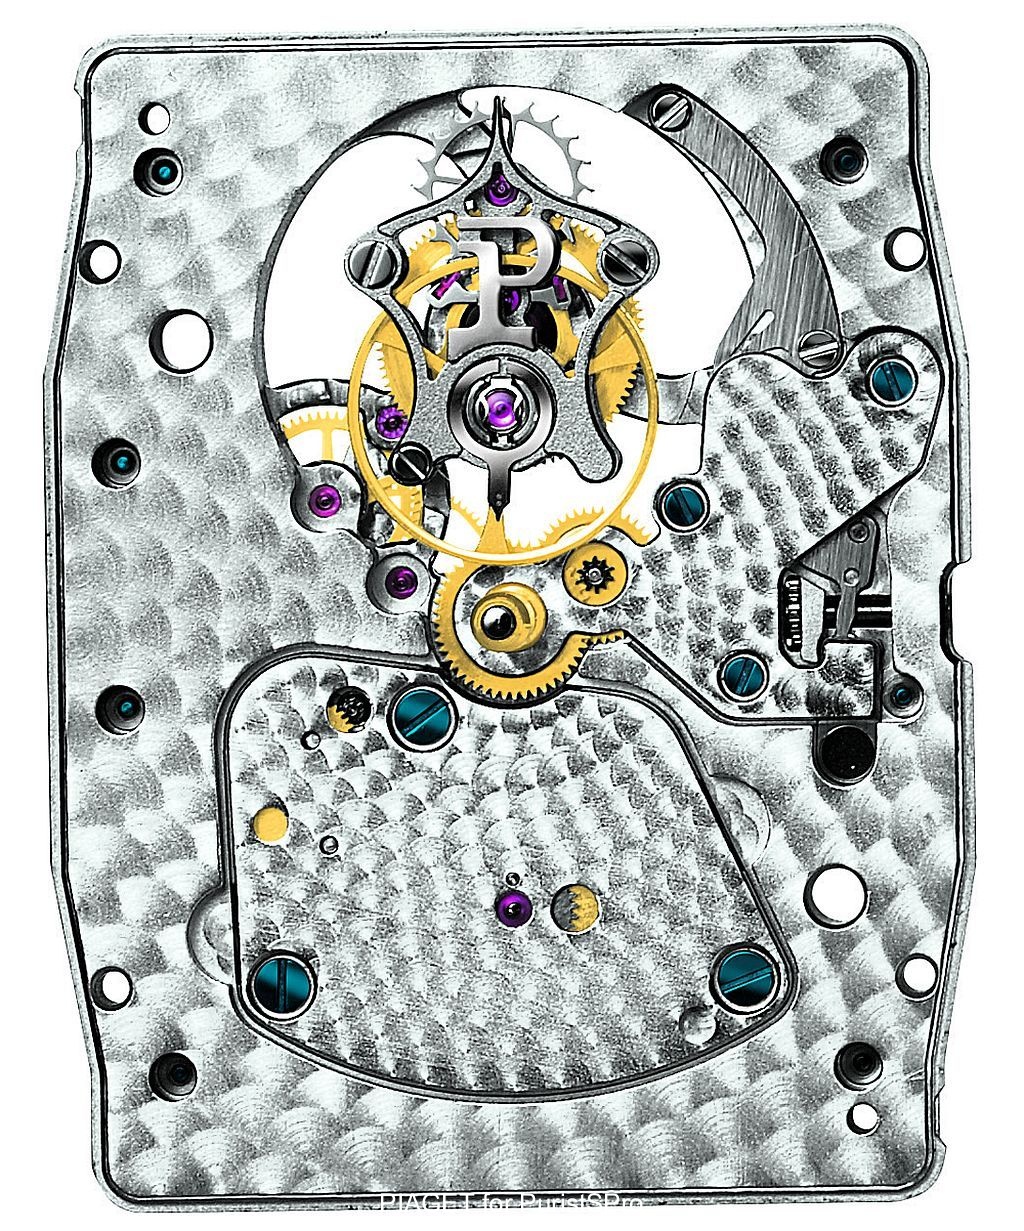 640P Moon Phases Tourbillon Movement - Piaget Luxury Watches Online